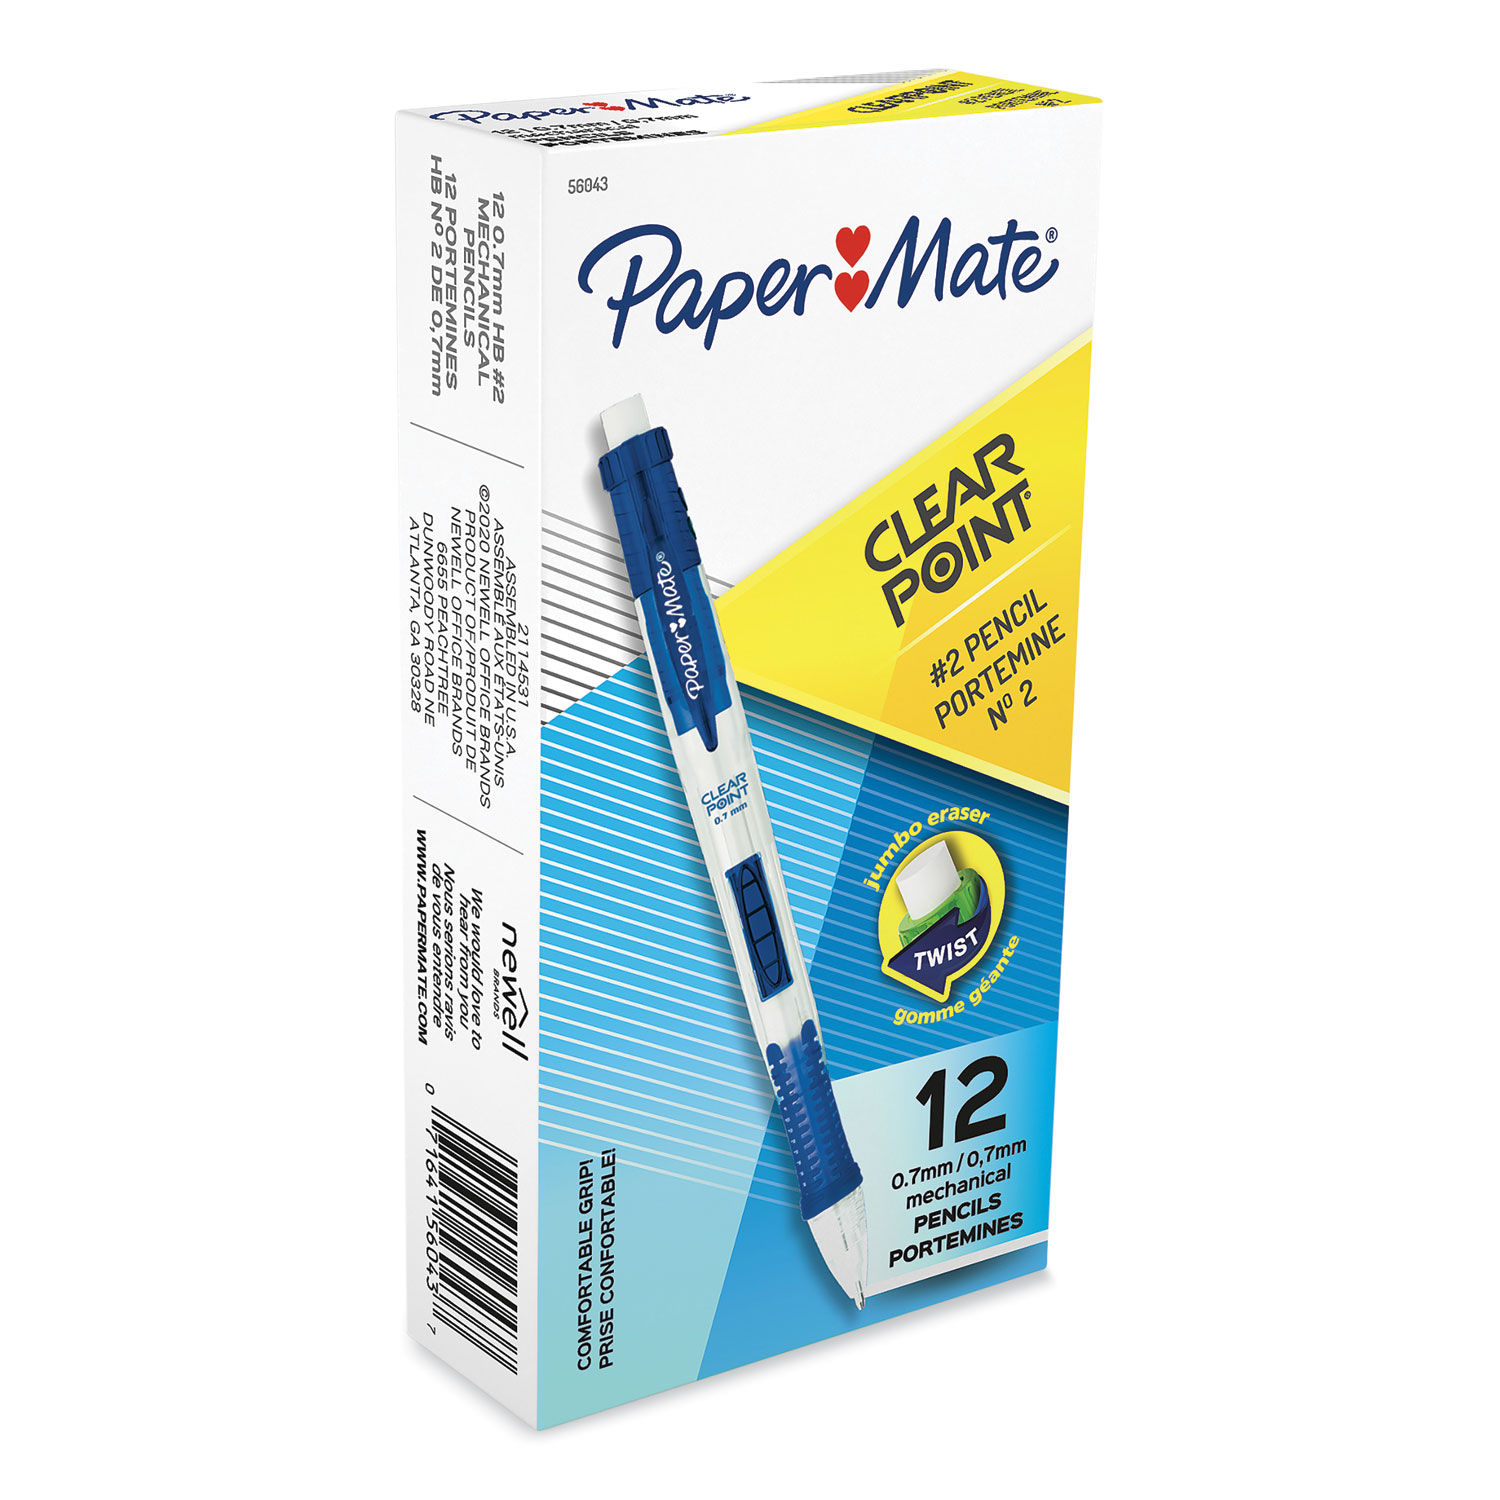  Paper Mate Clearpoint Mechanical Pencils, 0.7 mm Lead Pencil,  Black Barrel, Refillable, 6 Pack : Office Products